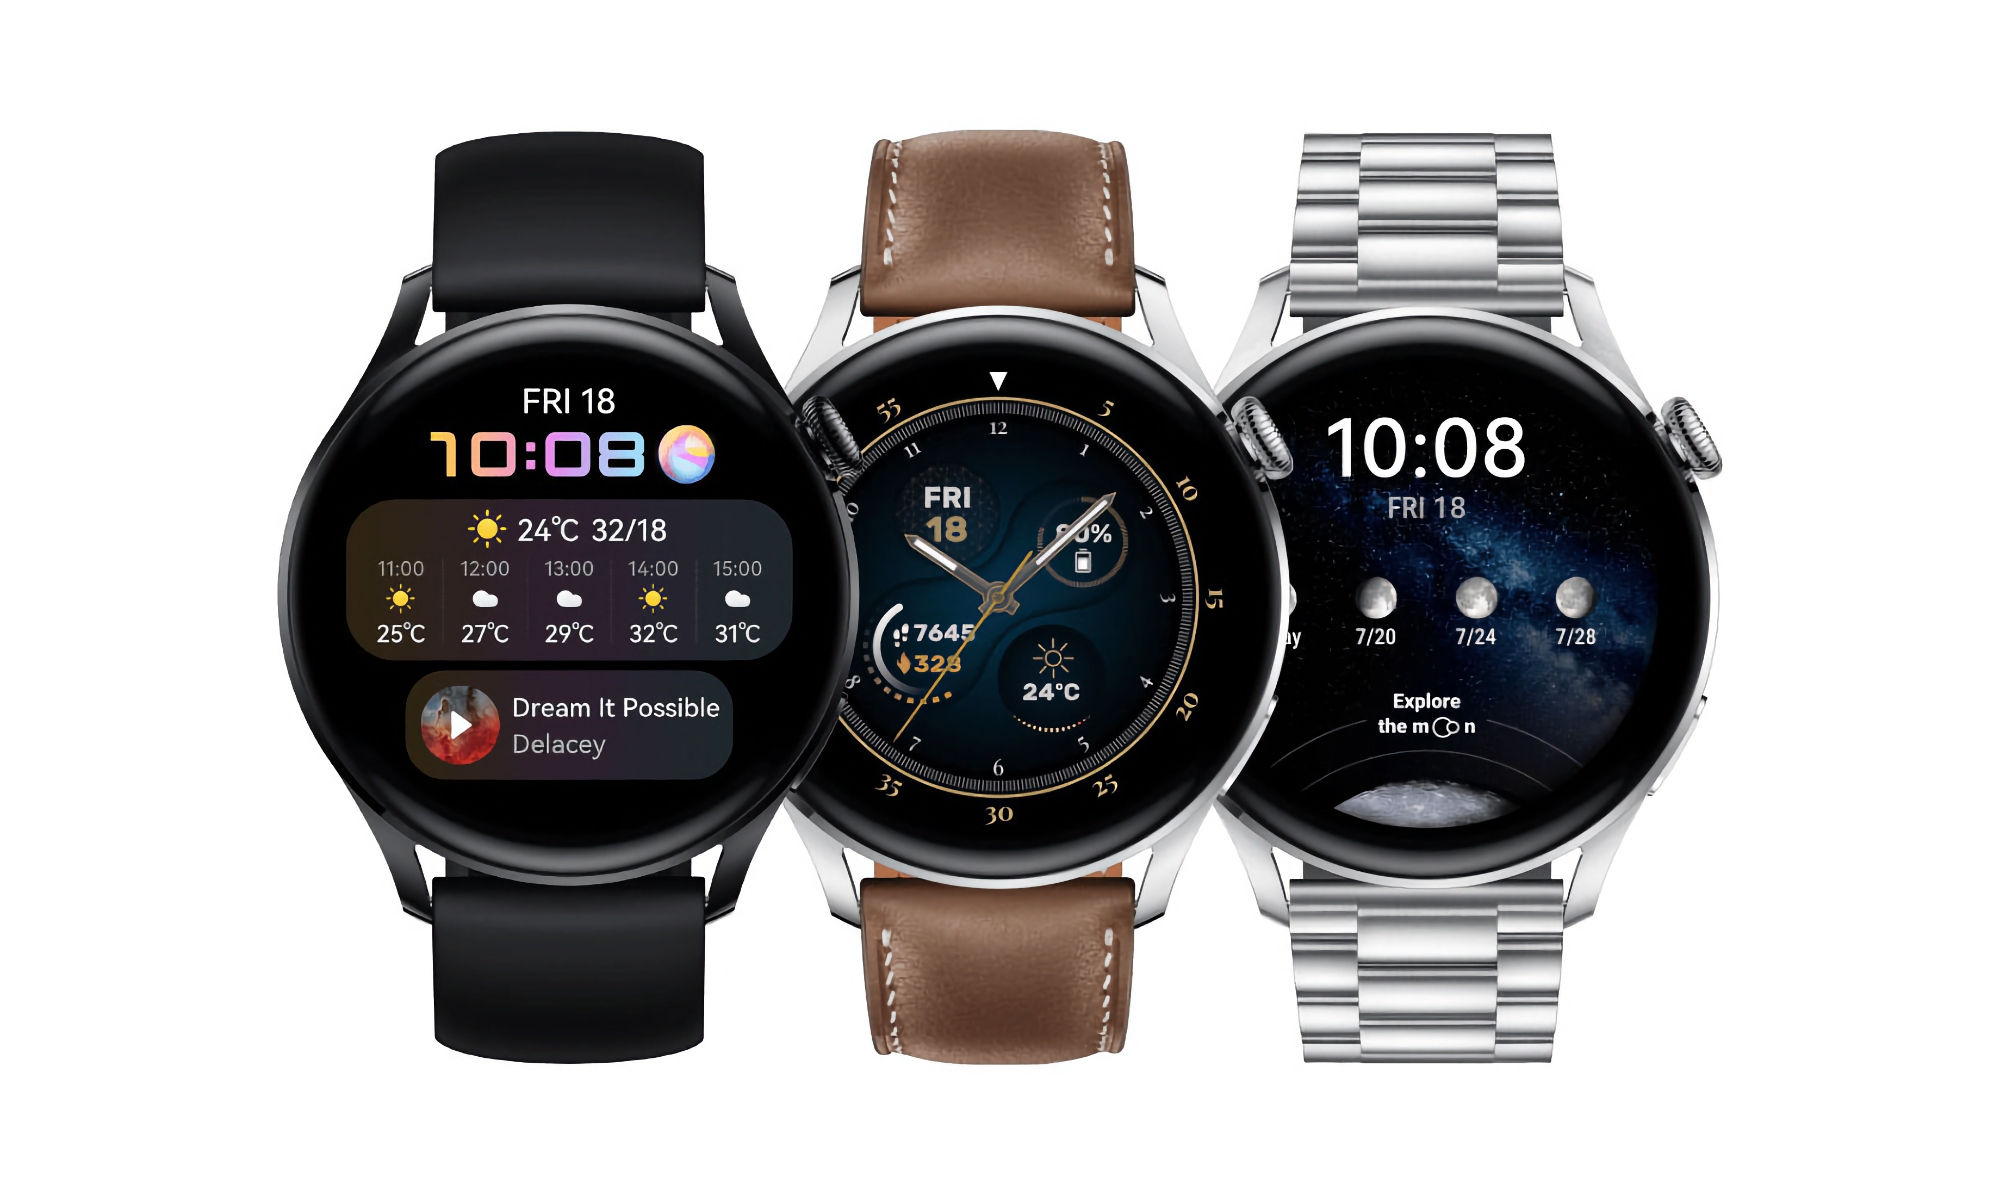  Huawei Watch 3 and Huawei Watch 3 Pro have started receiving a new software update